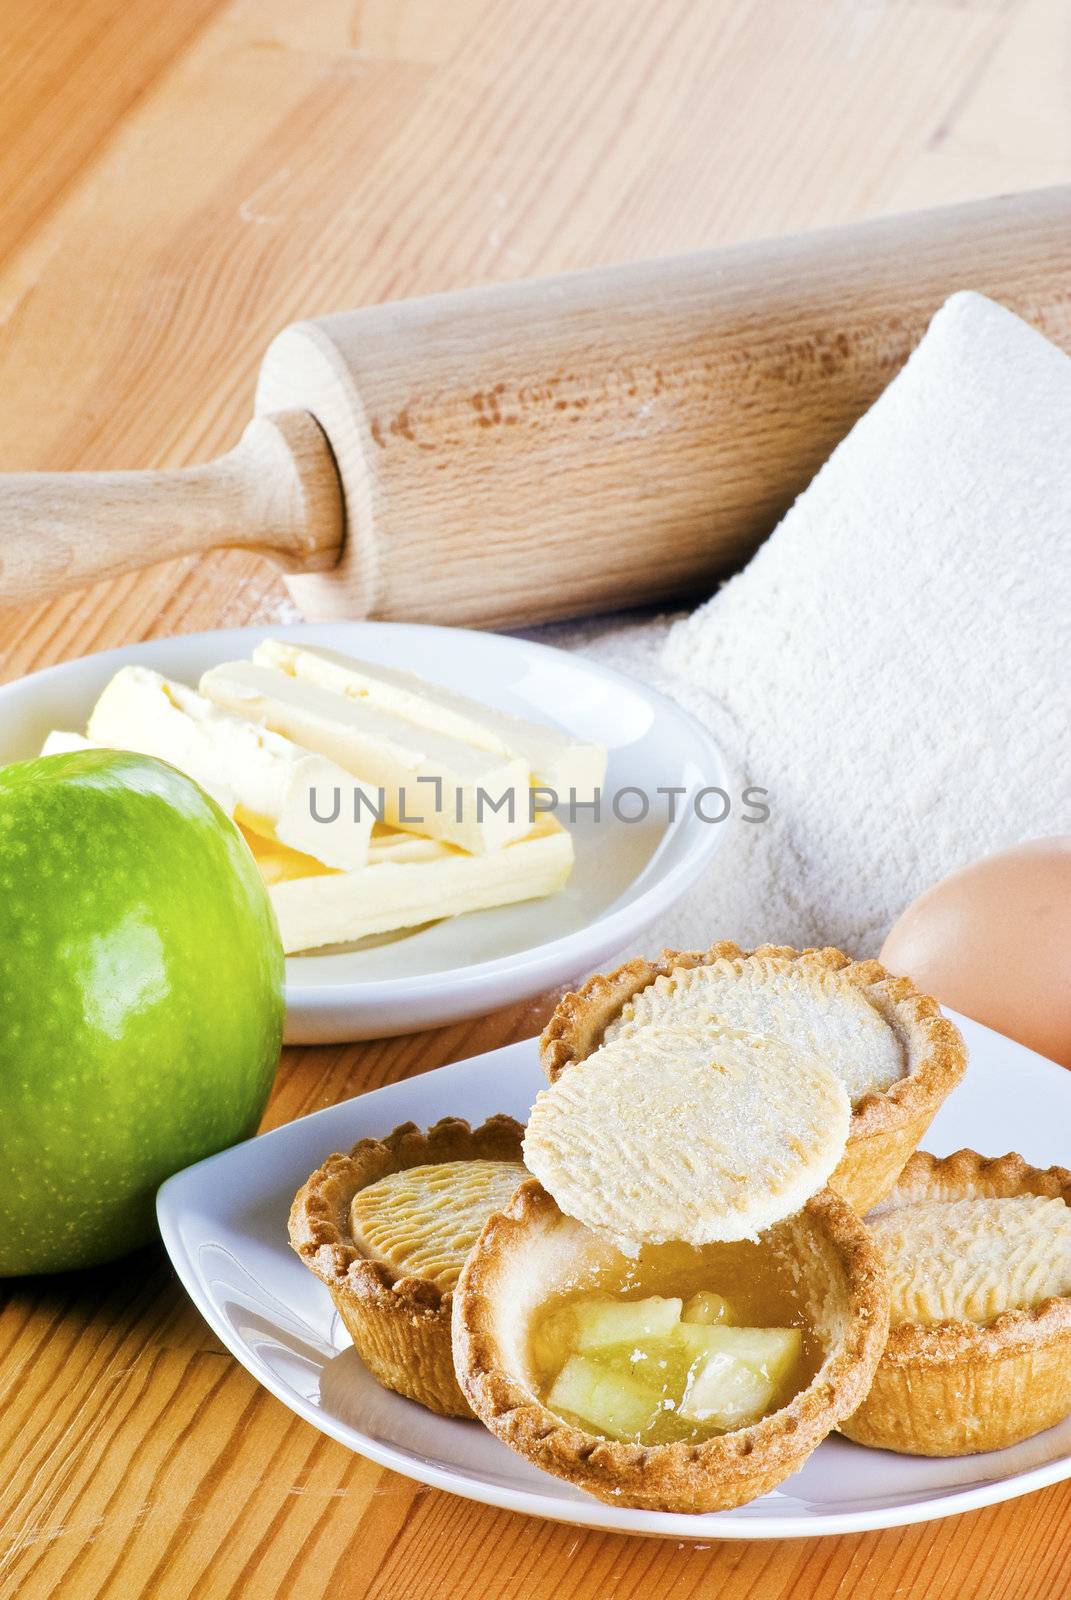 Freshly made apple pies on the table with one open